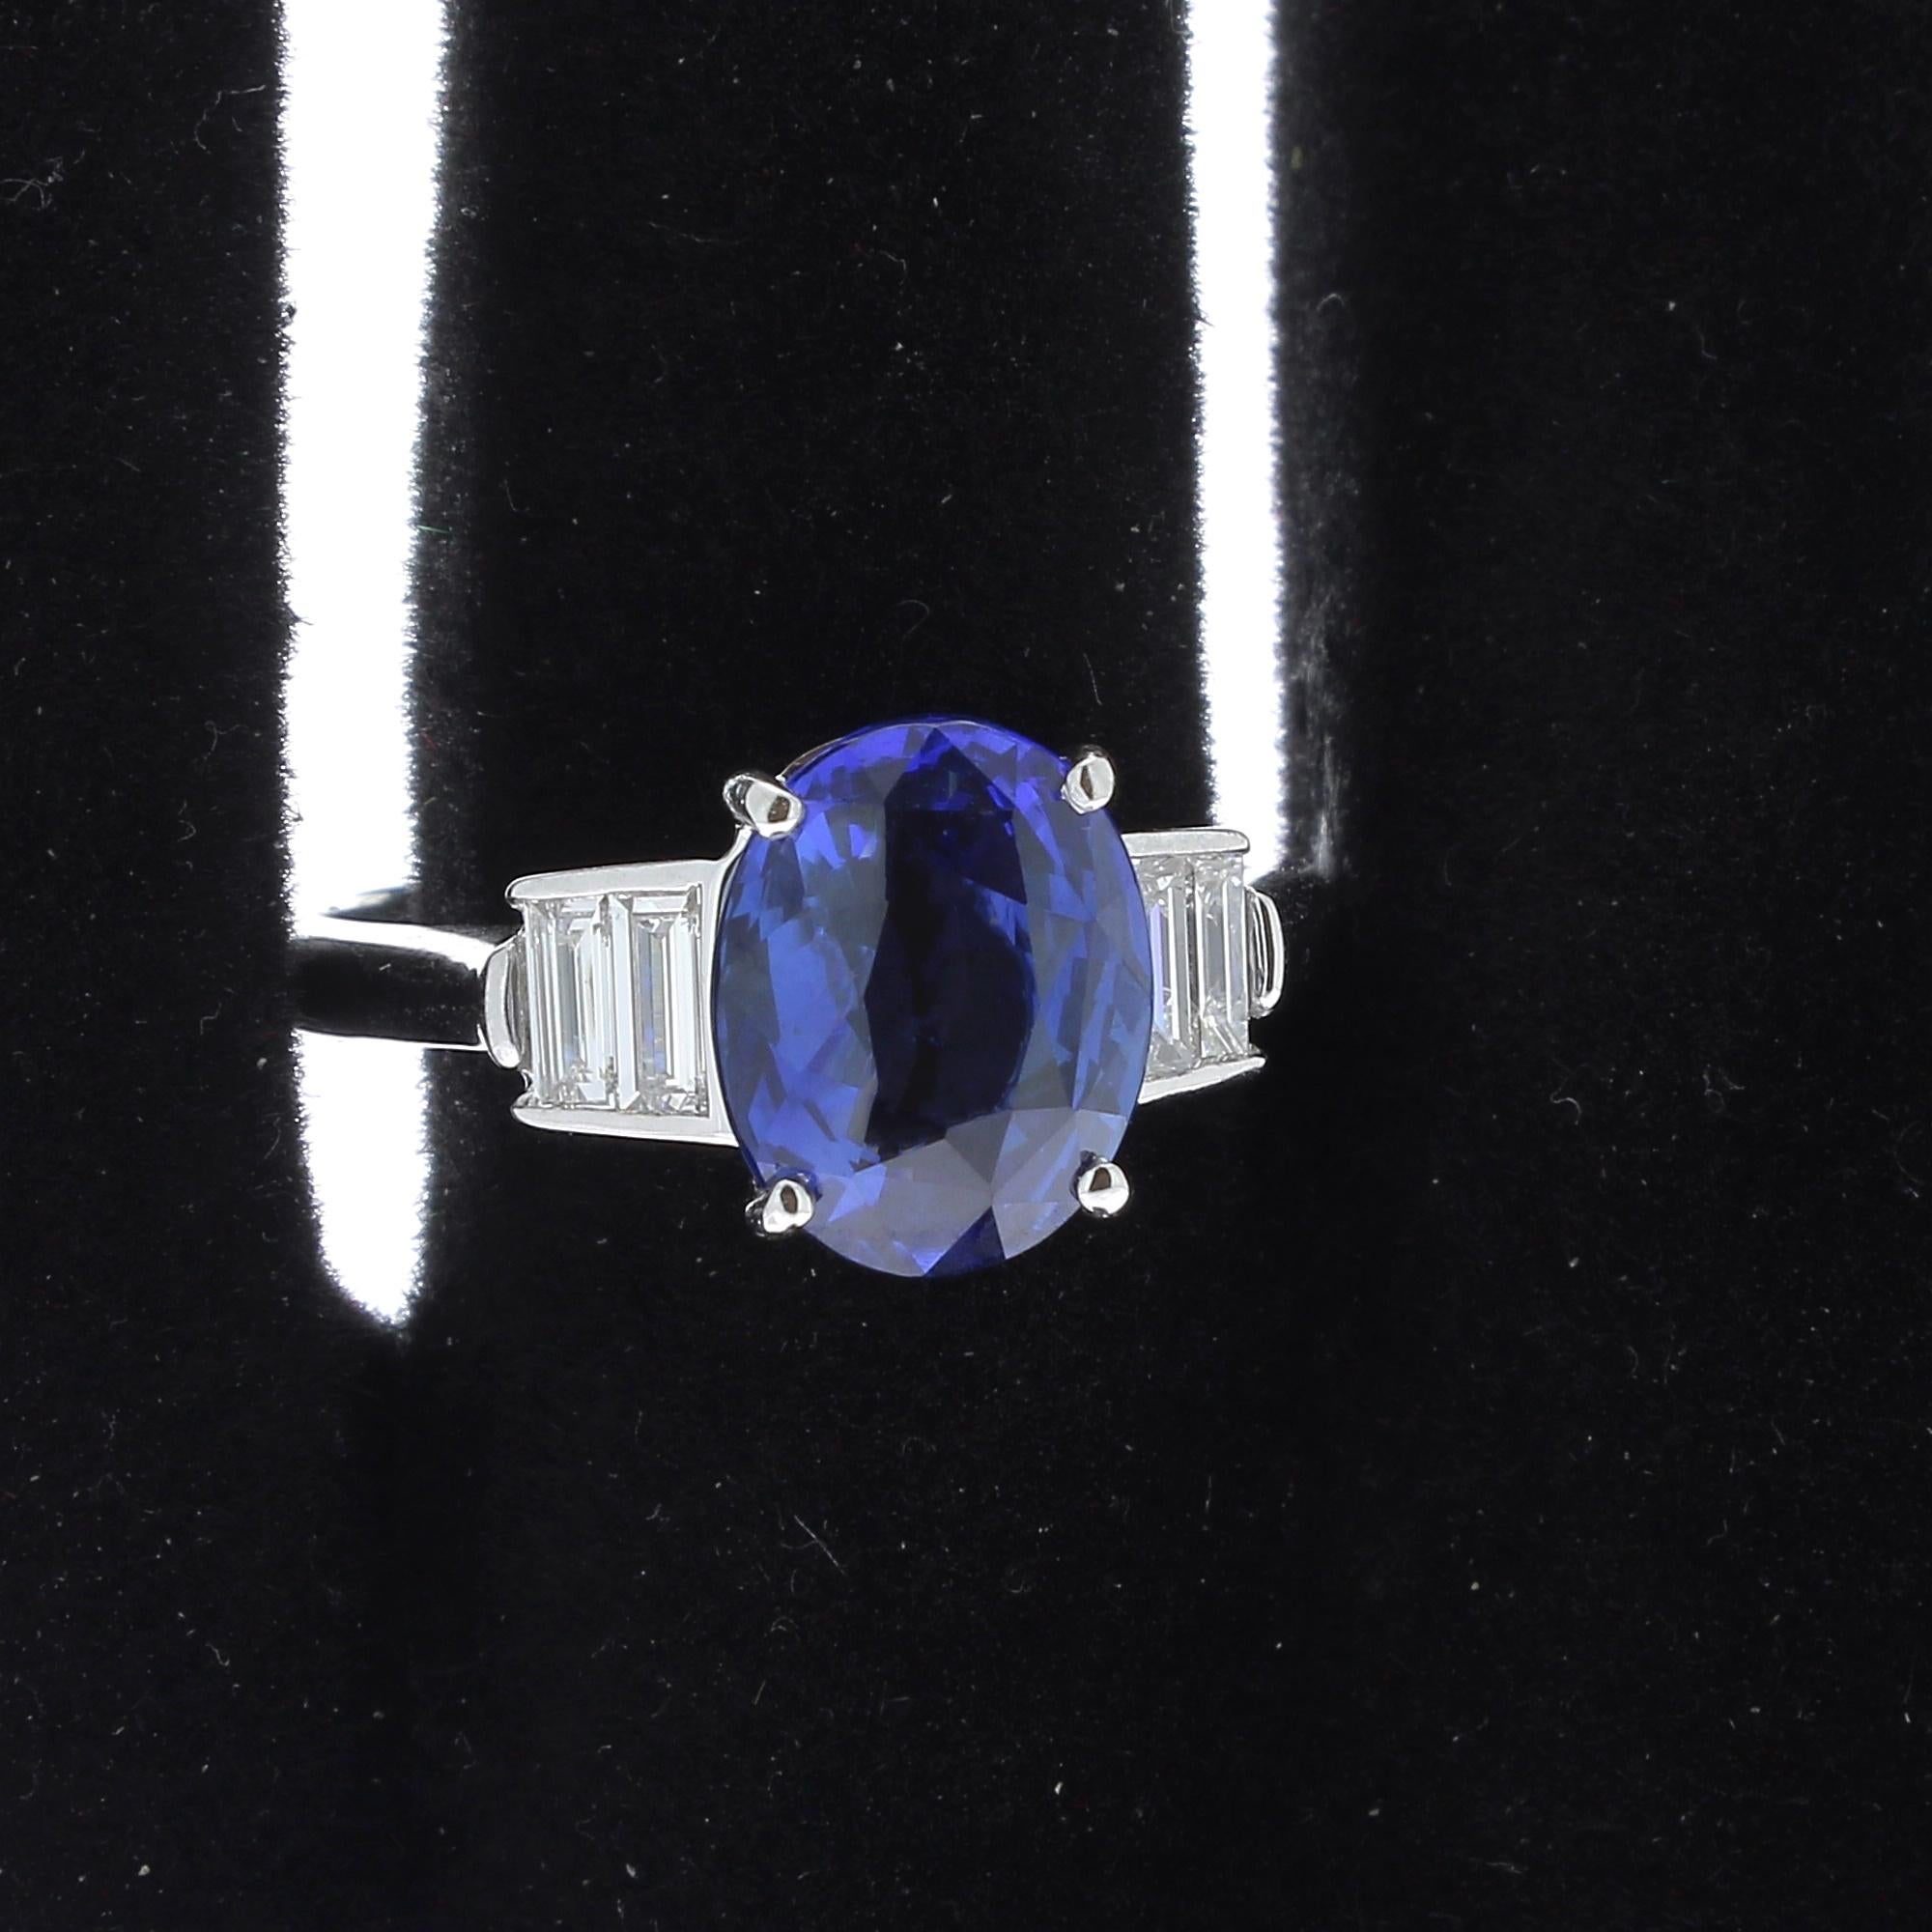 Oval Cut Certified 3.52 Carat Untreated Blue Sapphire and Diamond Rings